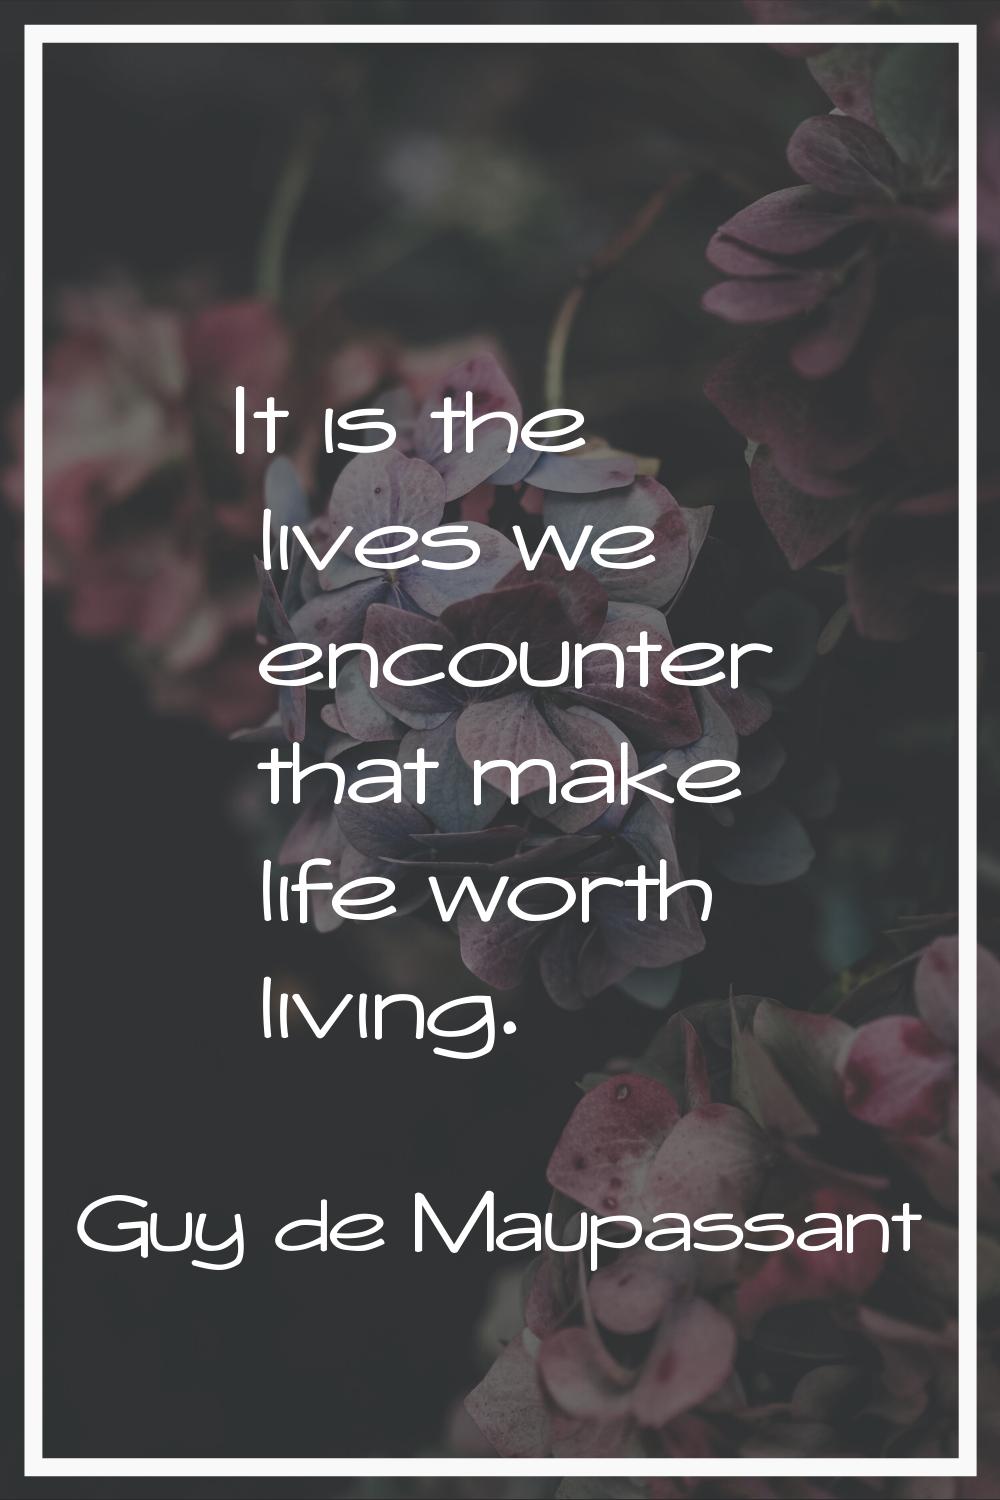 It is the lives we encounter that make life worth living.